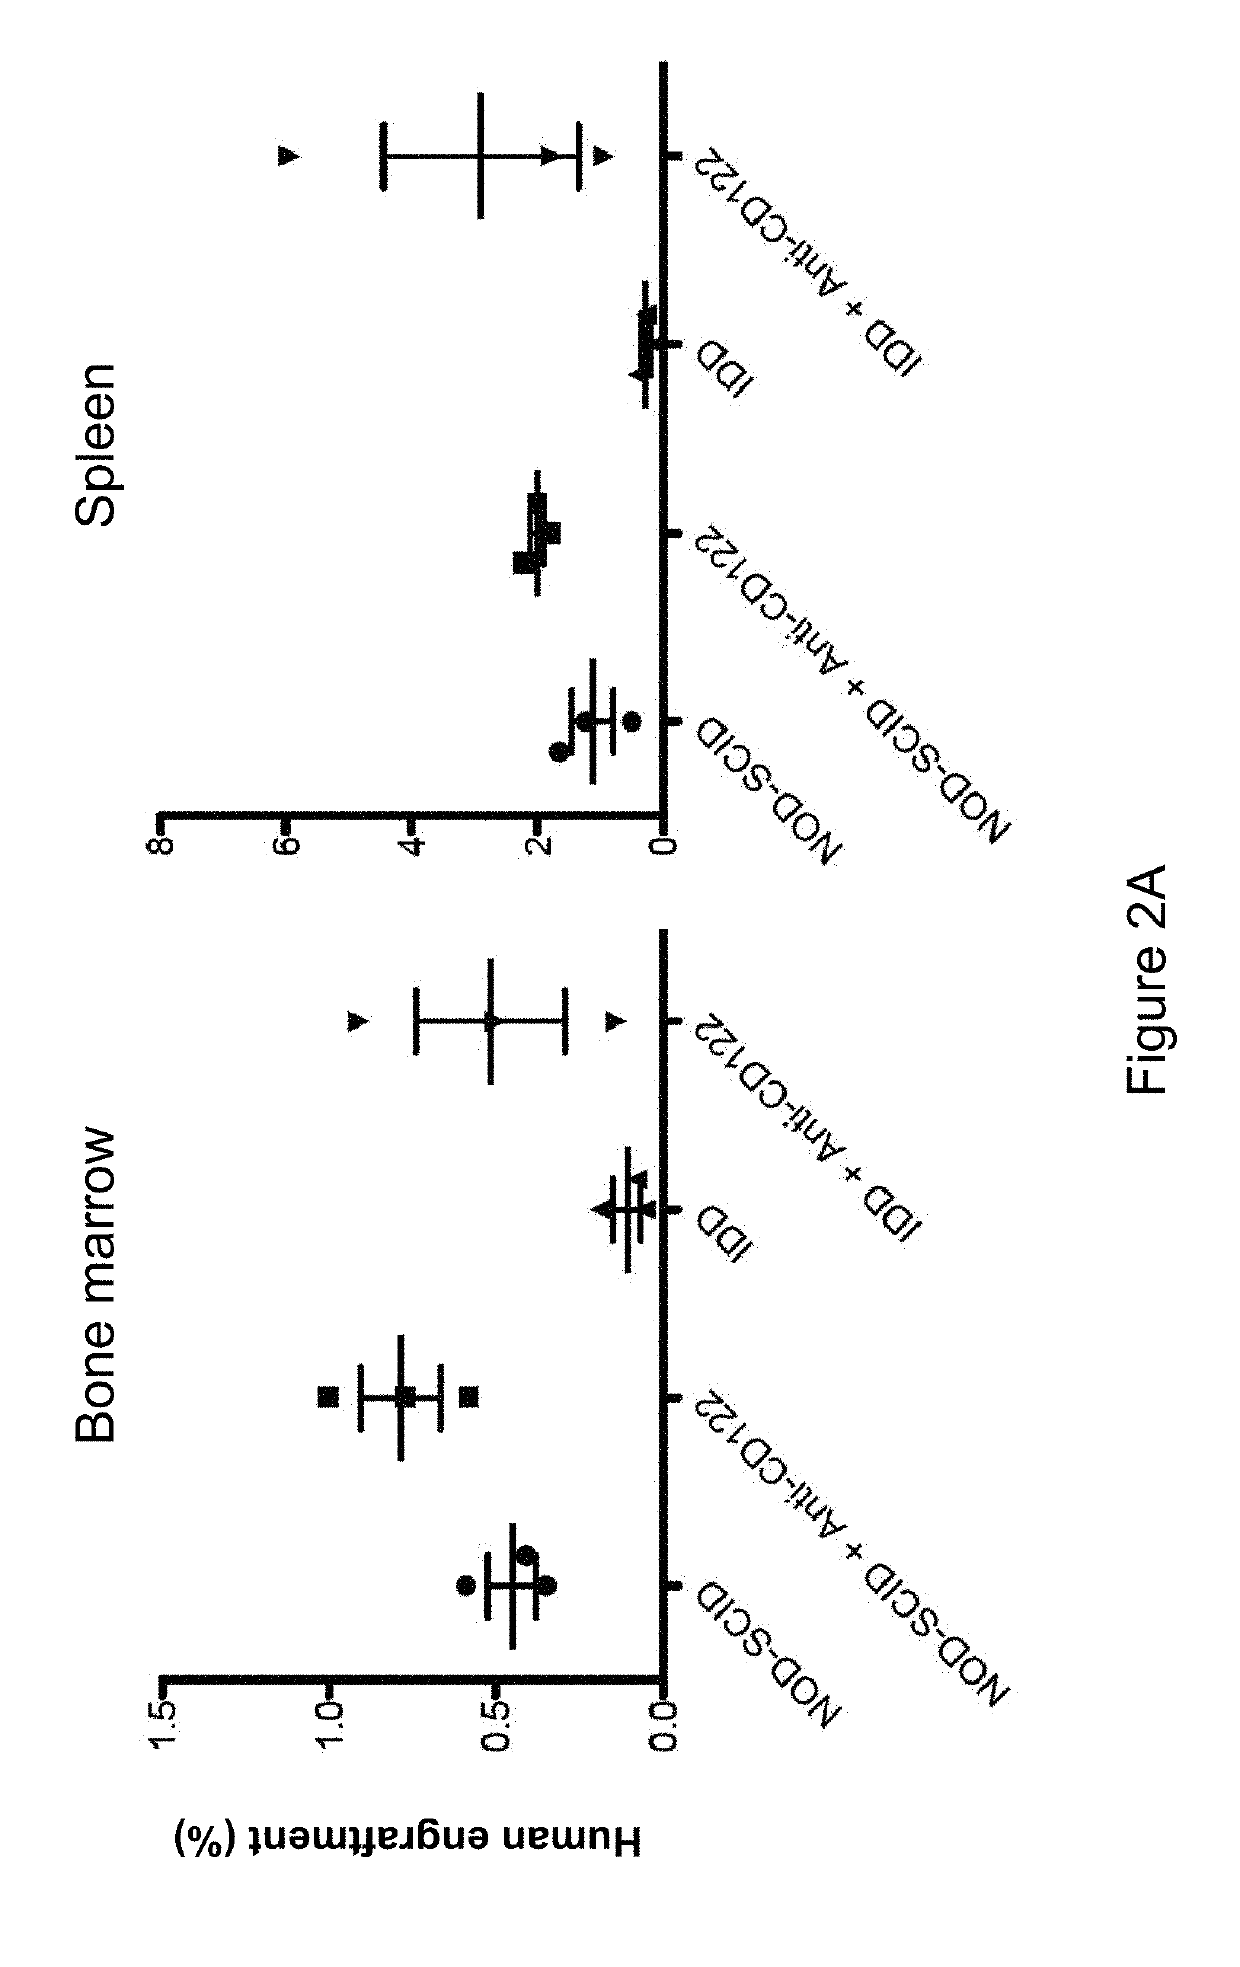 Compositions and methods for treating hematological cancers targeting the sirpalpha cd47 interaction